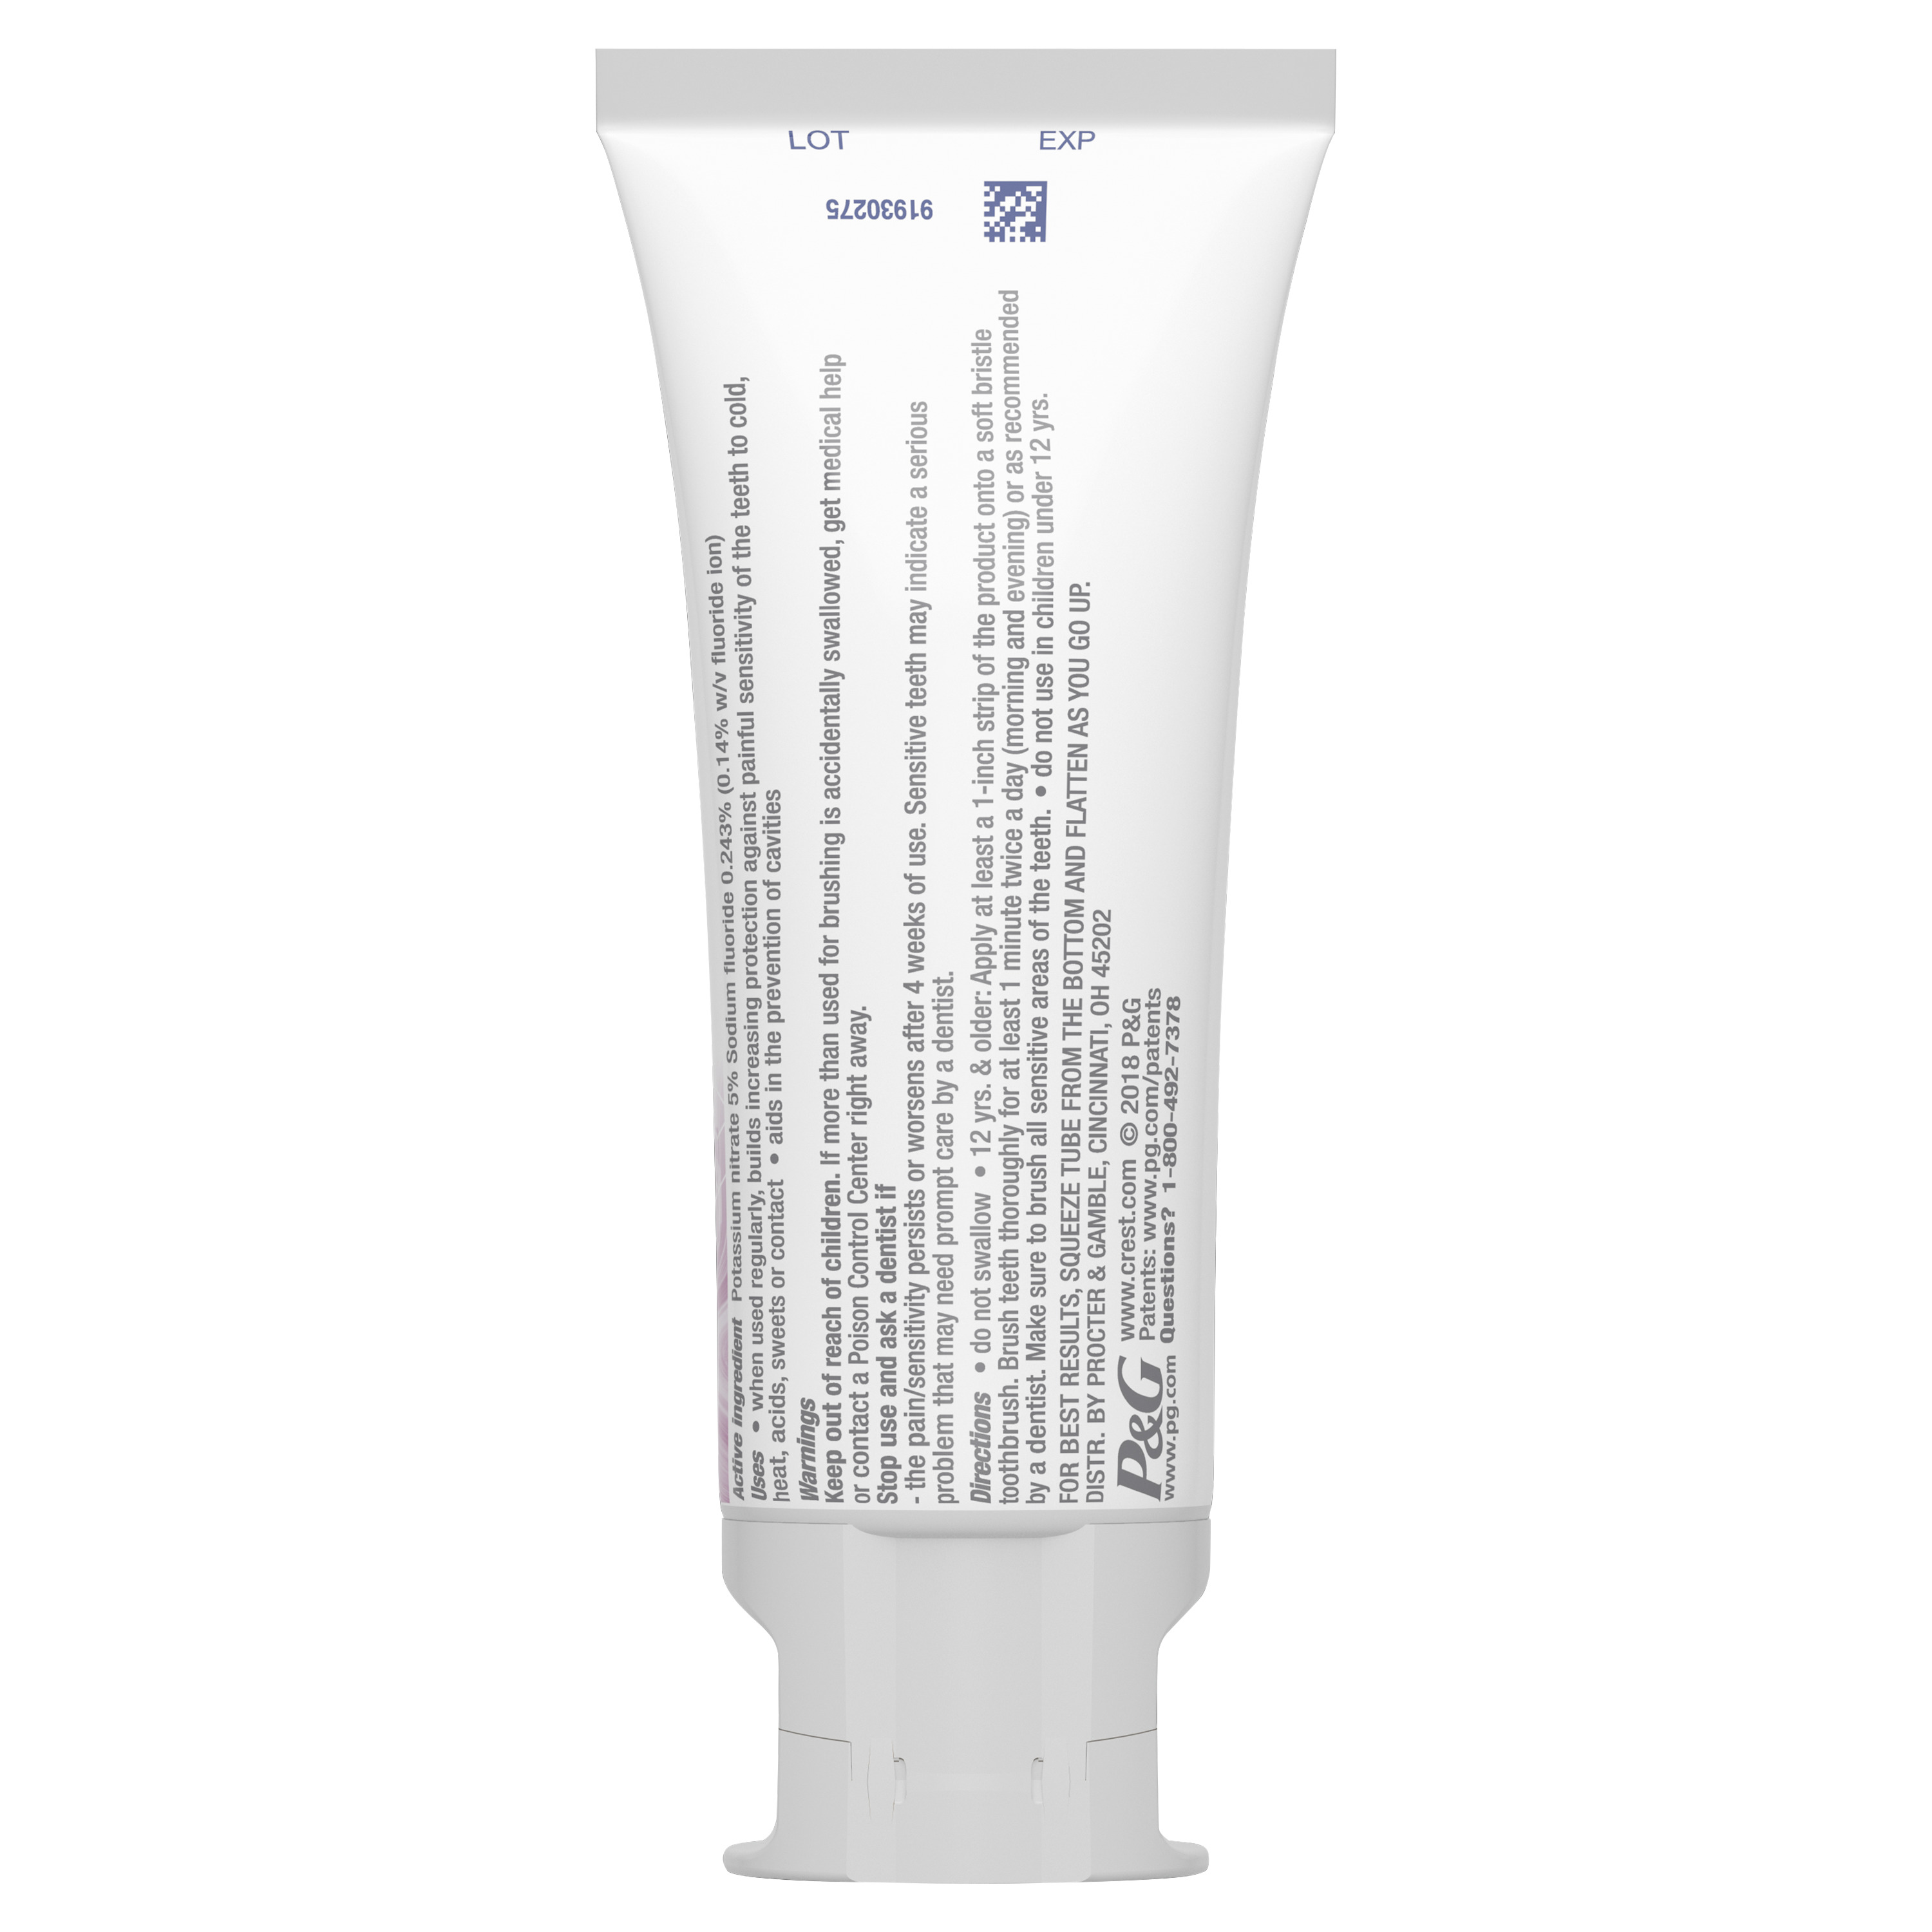 Crest 3D White Whitening Therapy Sensitivity Care Toothpaste, 4.1 oz - image 3 of 8